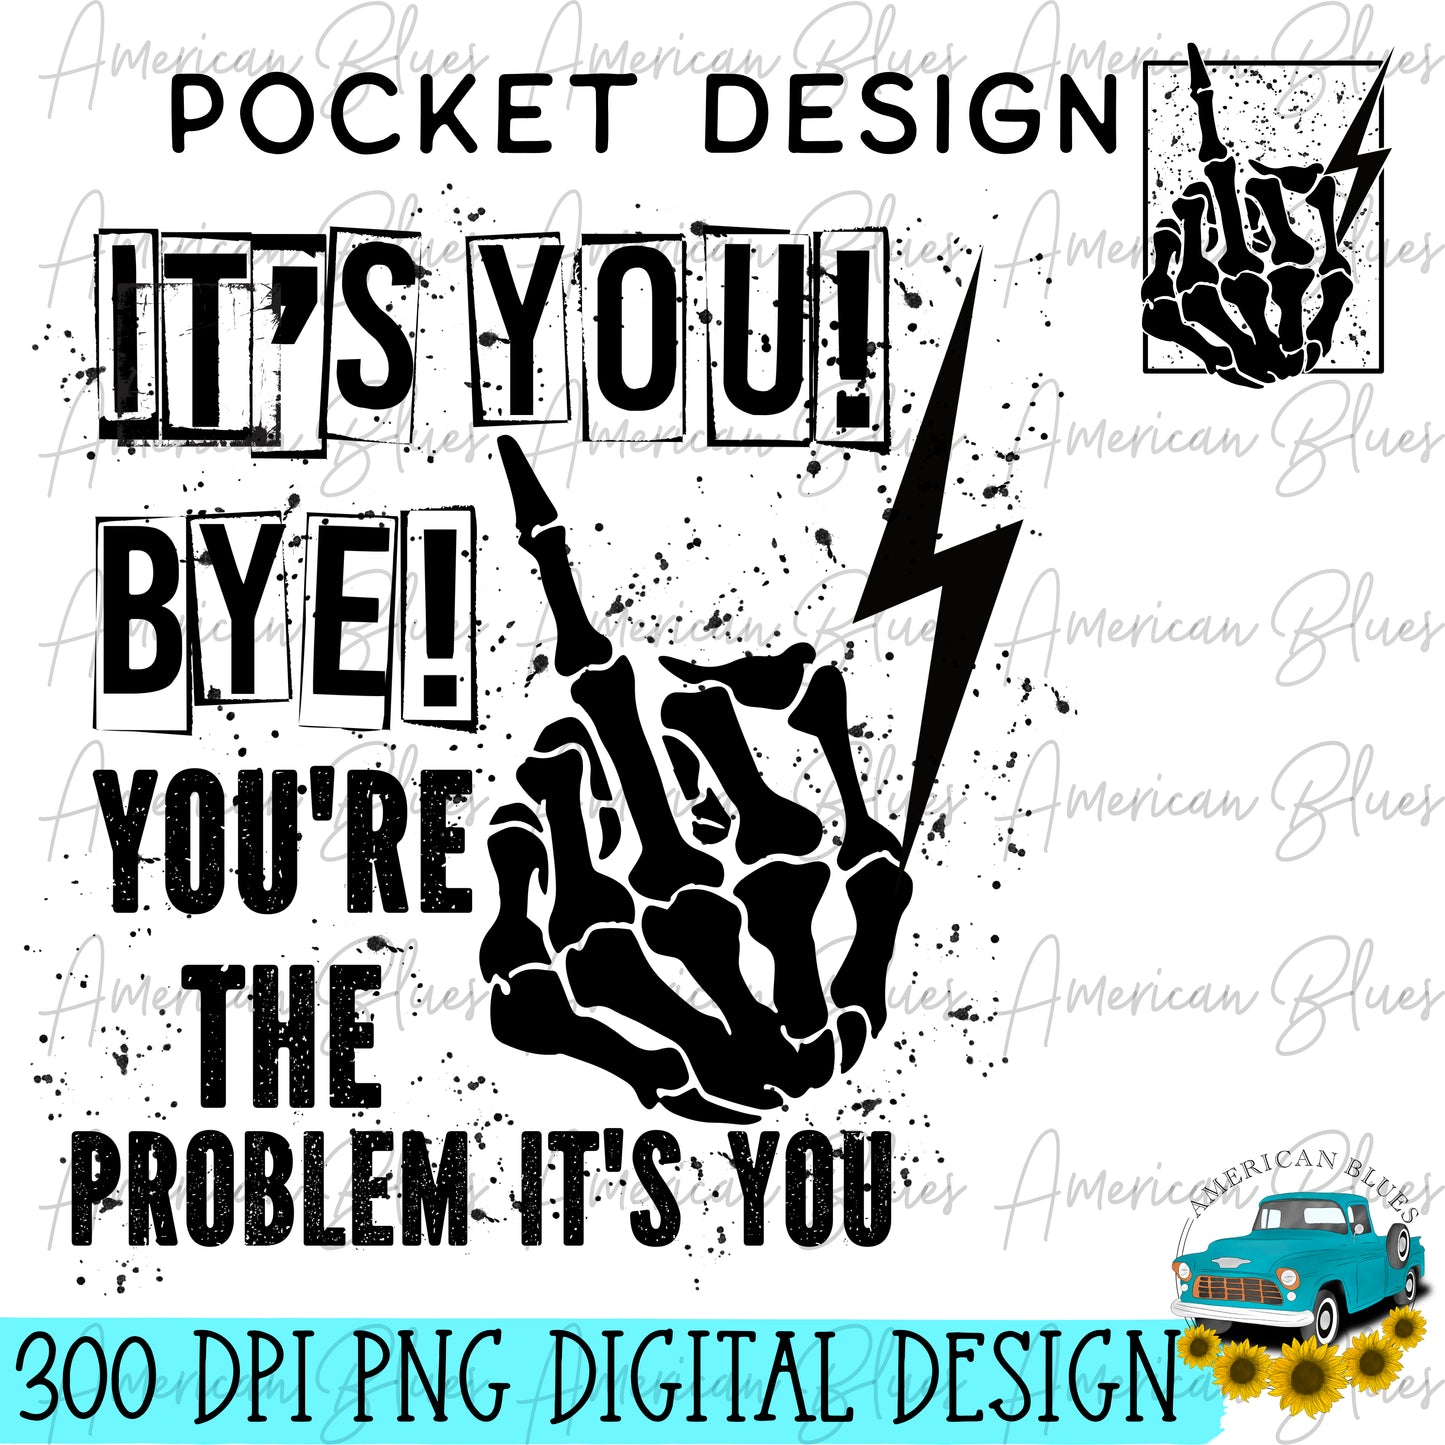 It's you! Bye! You're the problem it's you- with pocket design